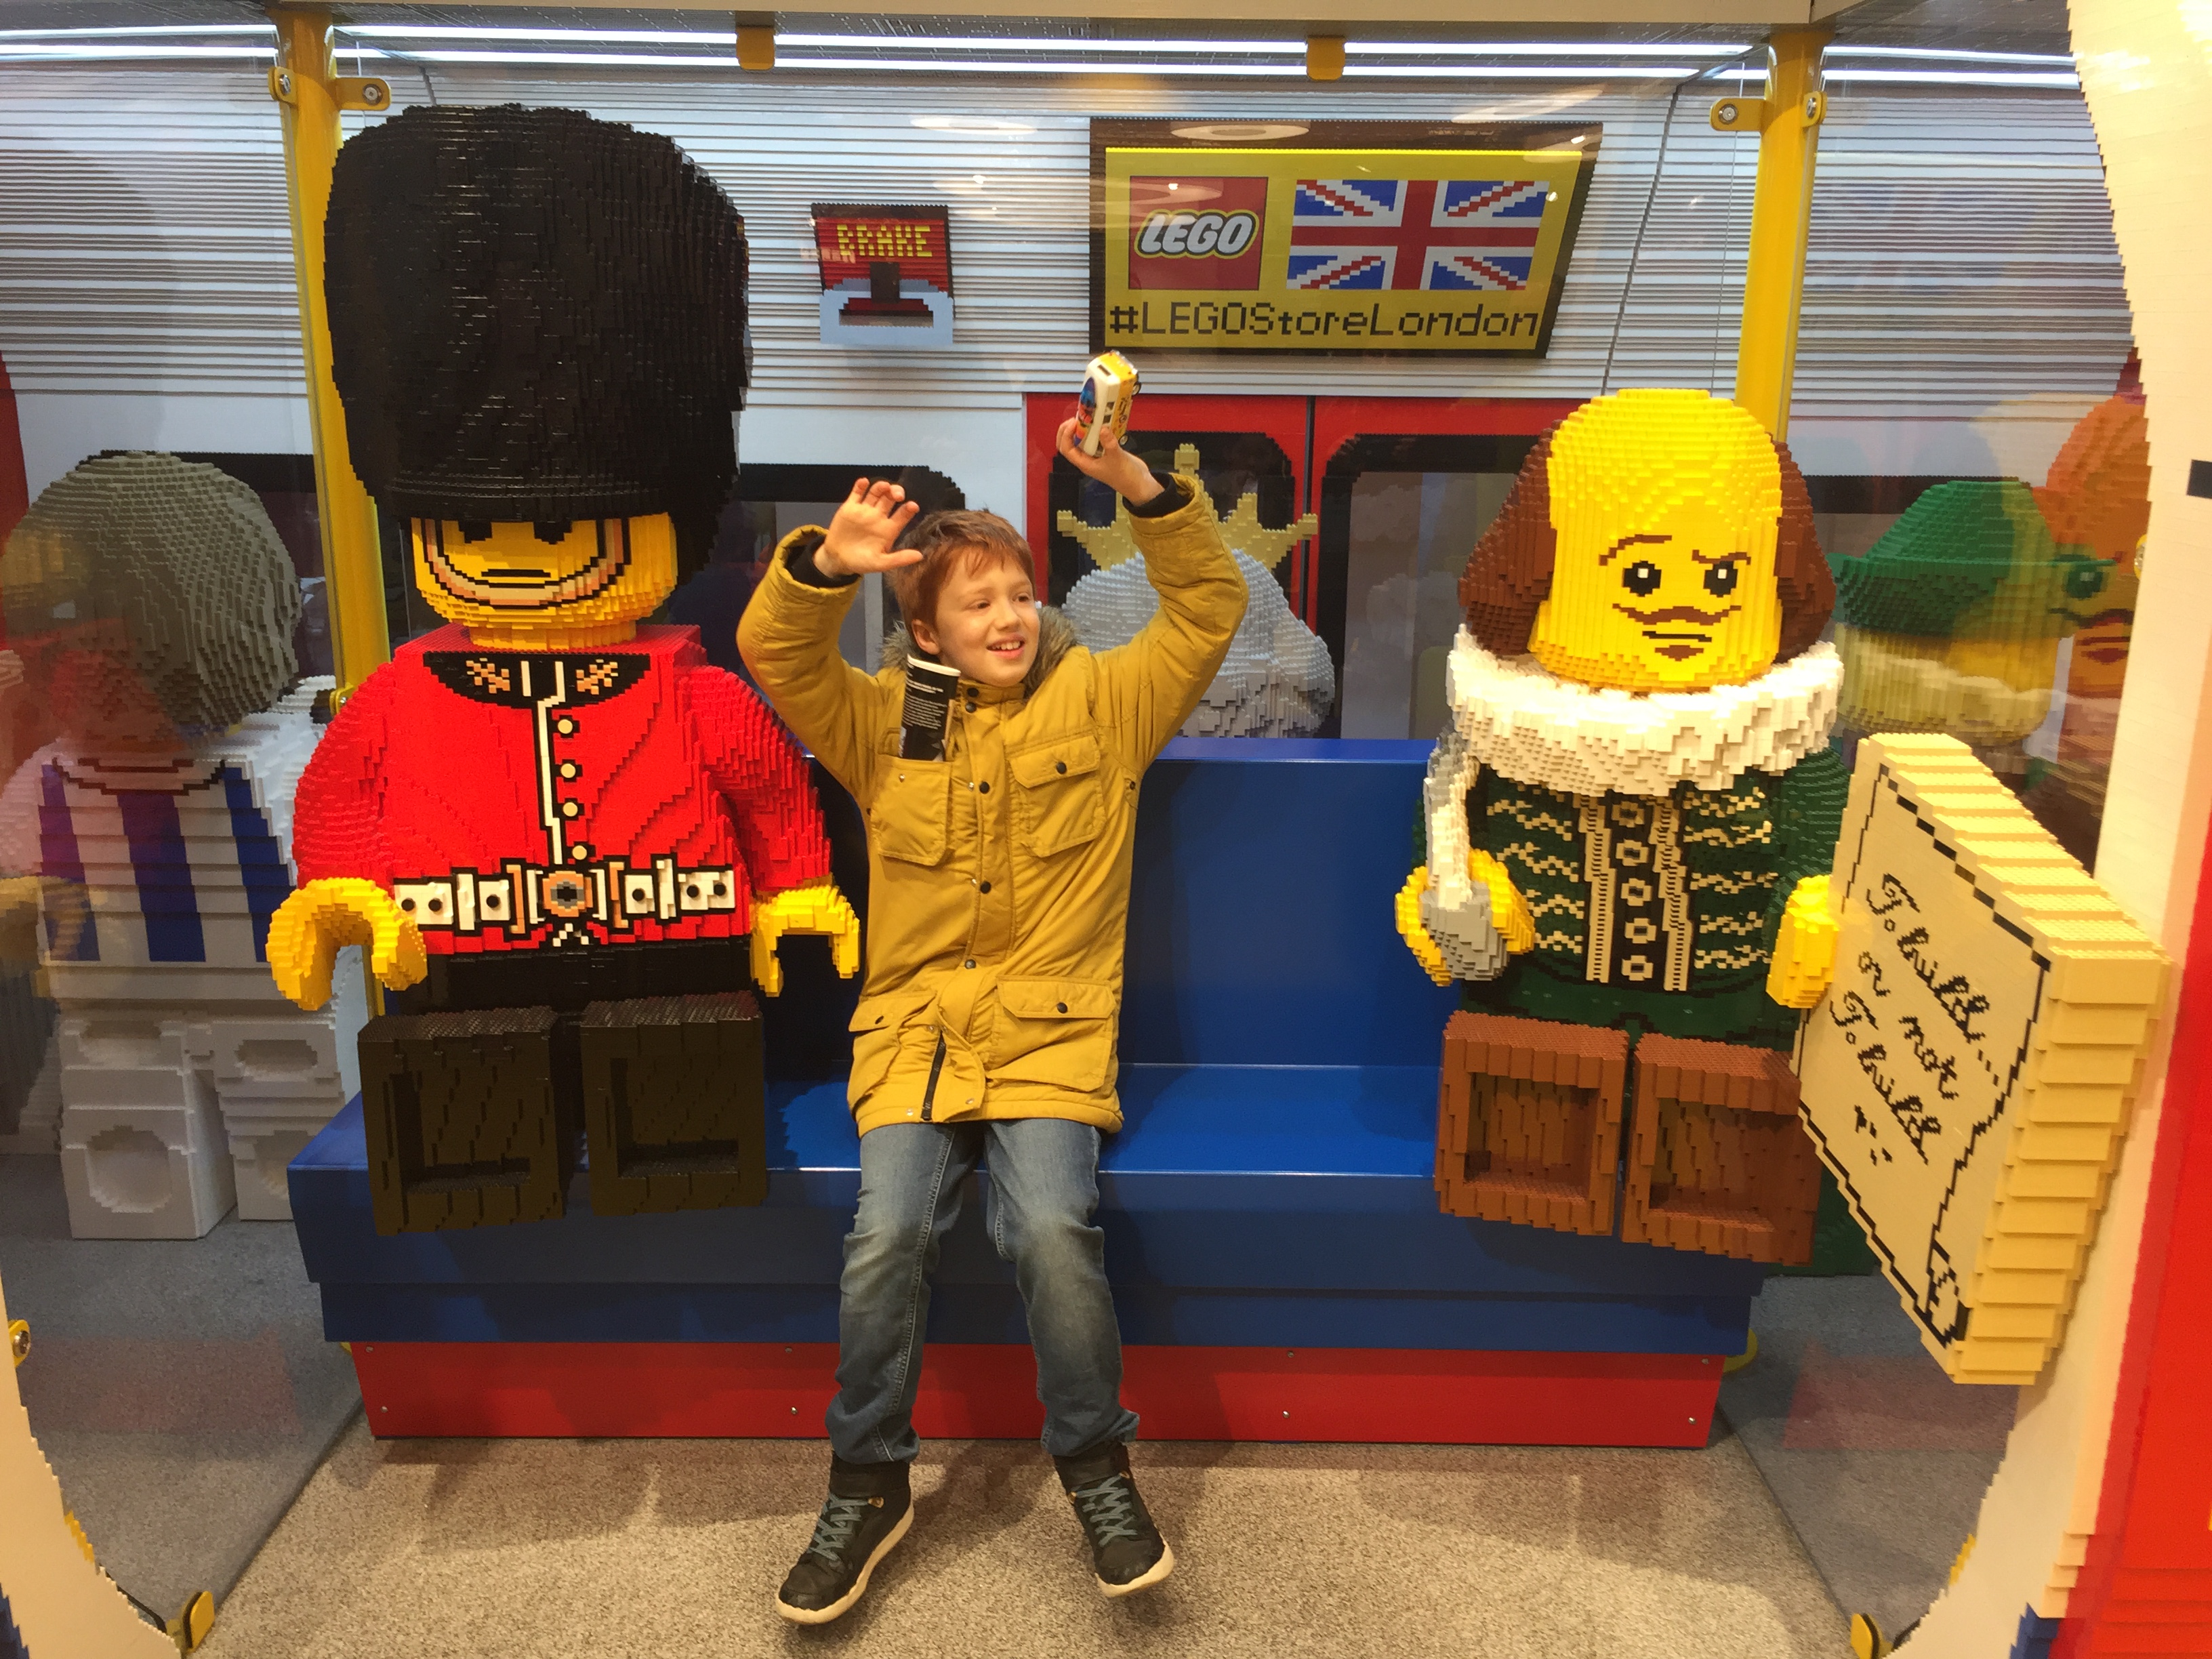 Toby K-Rates the Lego Store, Leicester Square